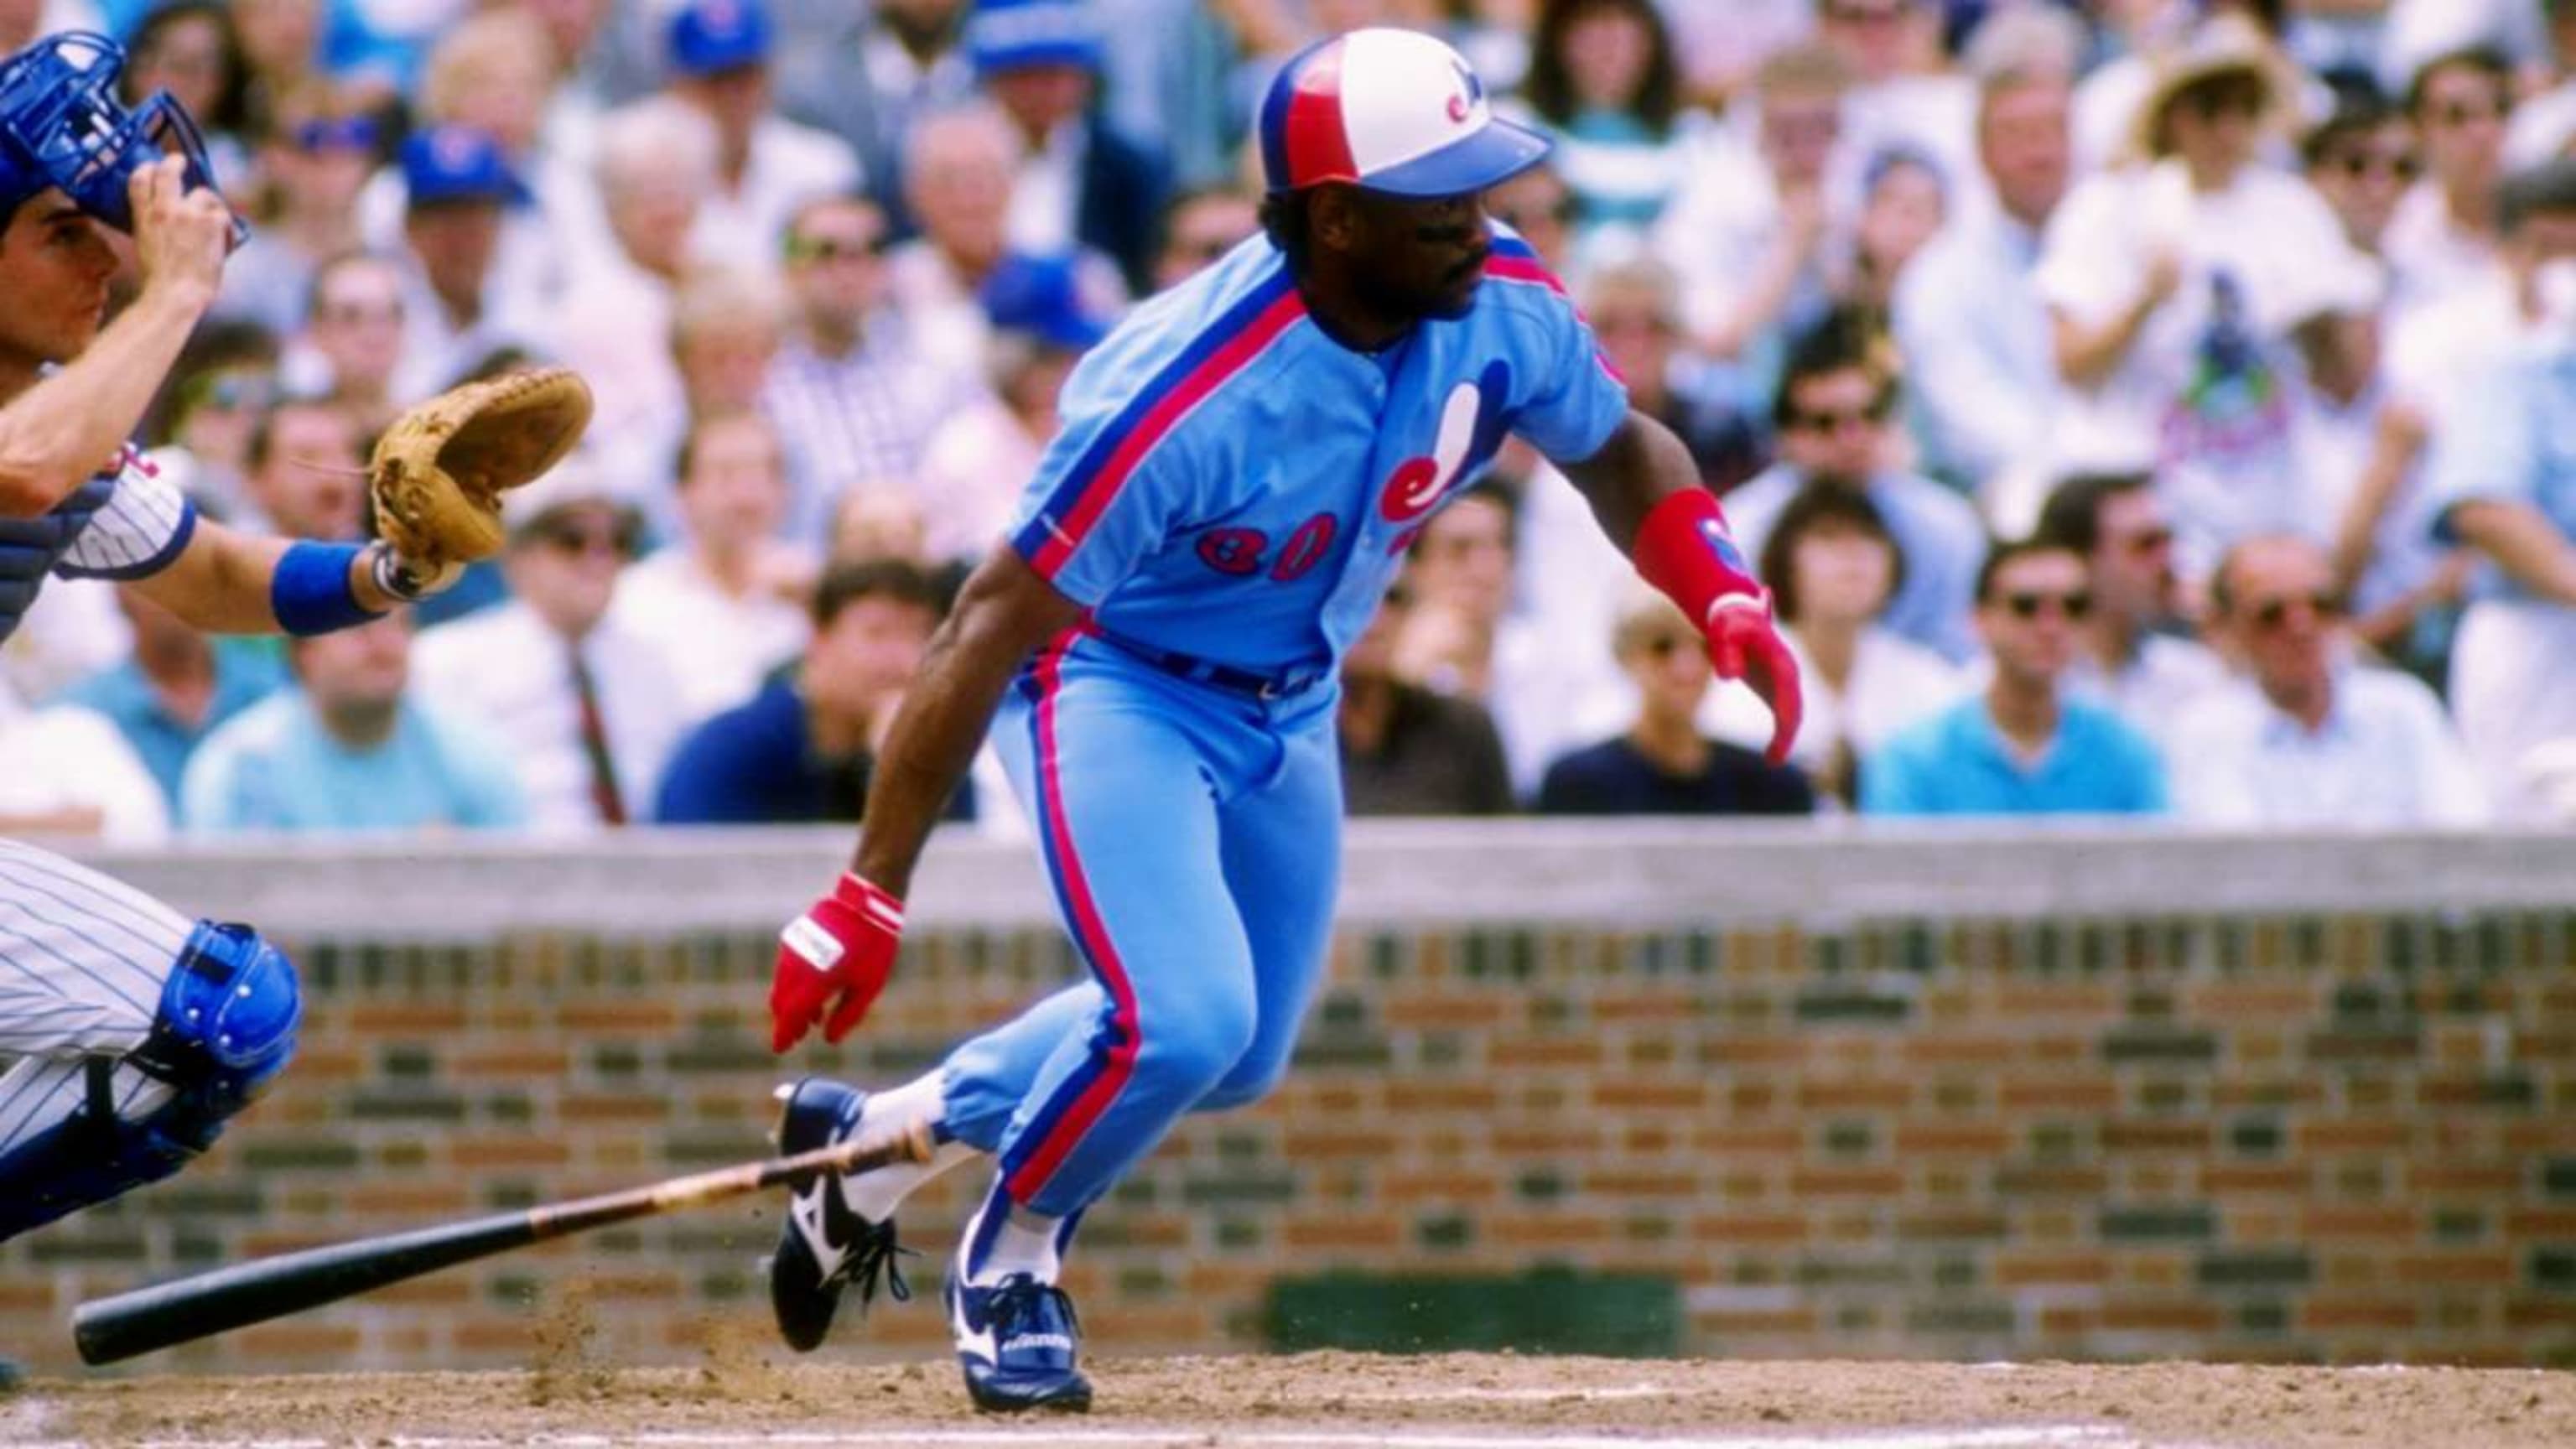 Tim Raines gains entry to Hall of Fame